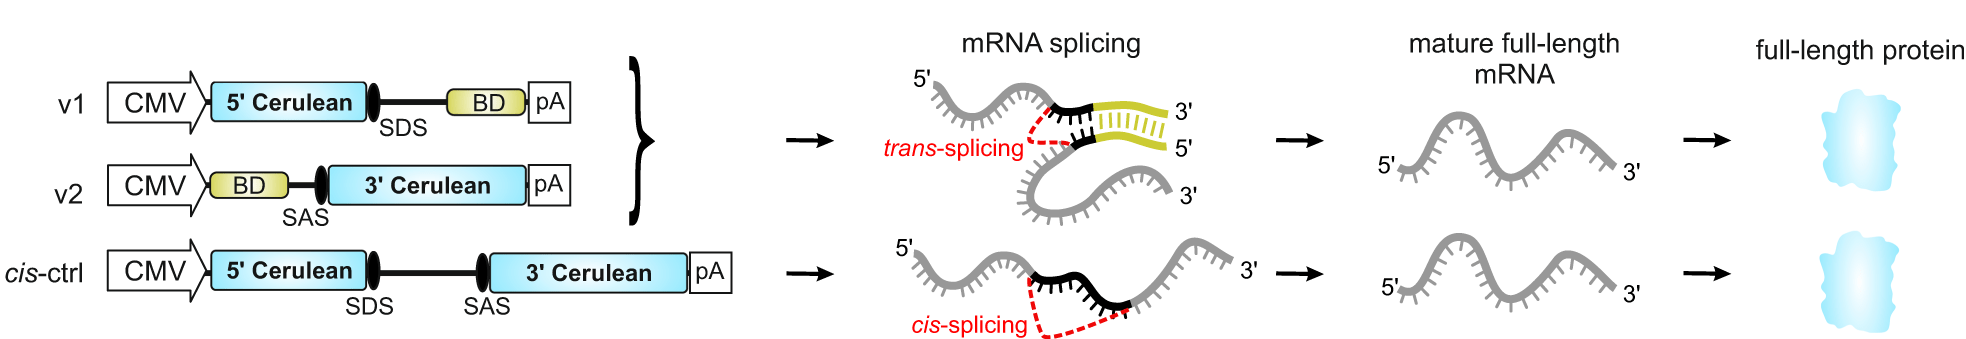 The upper row of the diagram shows two vectors, v1 and v2, carrying gene segments labeled 5’ Cerulean and 3’ Cerulean, respectively, along with regulatory elements including promoters, binding domains, a splice donor site on v1, a splice acceptor site on v2, and polyadenylation signals. When the resulting two mRNAs are bound via their binding domains, they undergo mRNA trans-splicing where the 5’ and 3’ Cerulean segments from v1 and v2 become joined into one mature mRNA. In the lower part of the diagram, the cis-splicing control vector has 5’ Cerulean and 3’ Cerulean separated by a splice donor site, an intron, and a splice acceptor site. This mRNA undergoes cis-splicing to remove the intron. In each case, the successful splicing results in a full-length mRNA that is translated into a full-length protein.